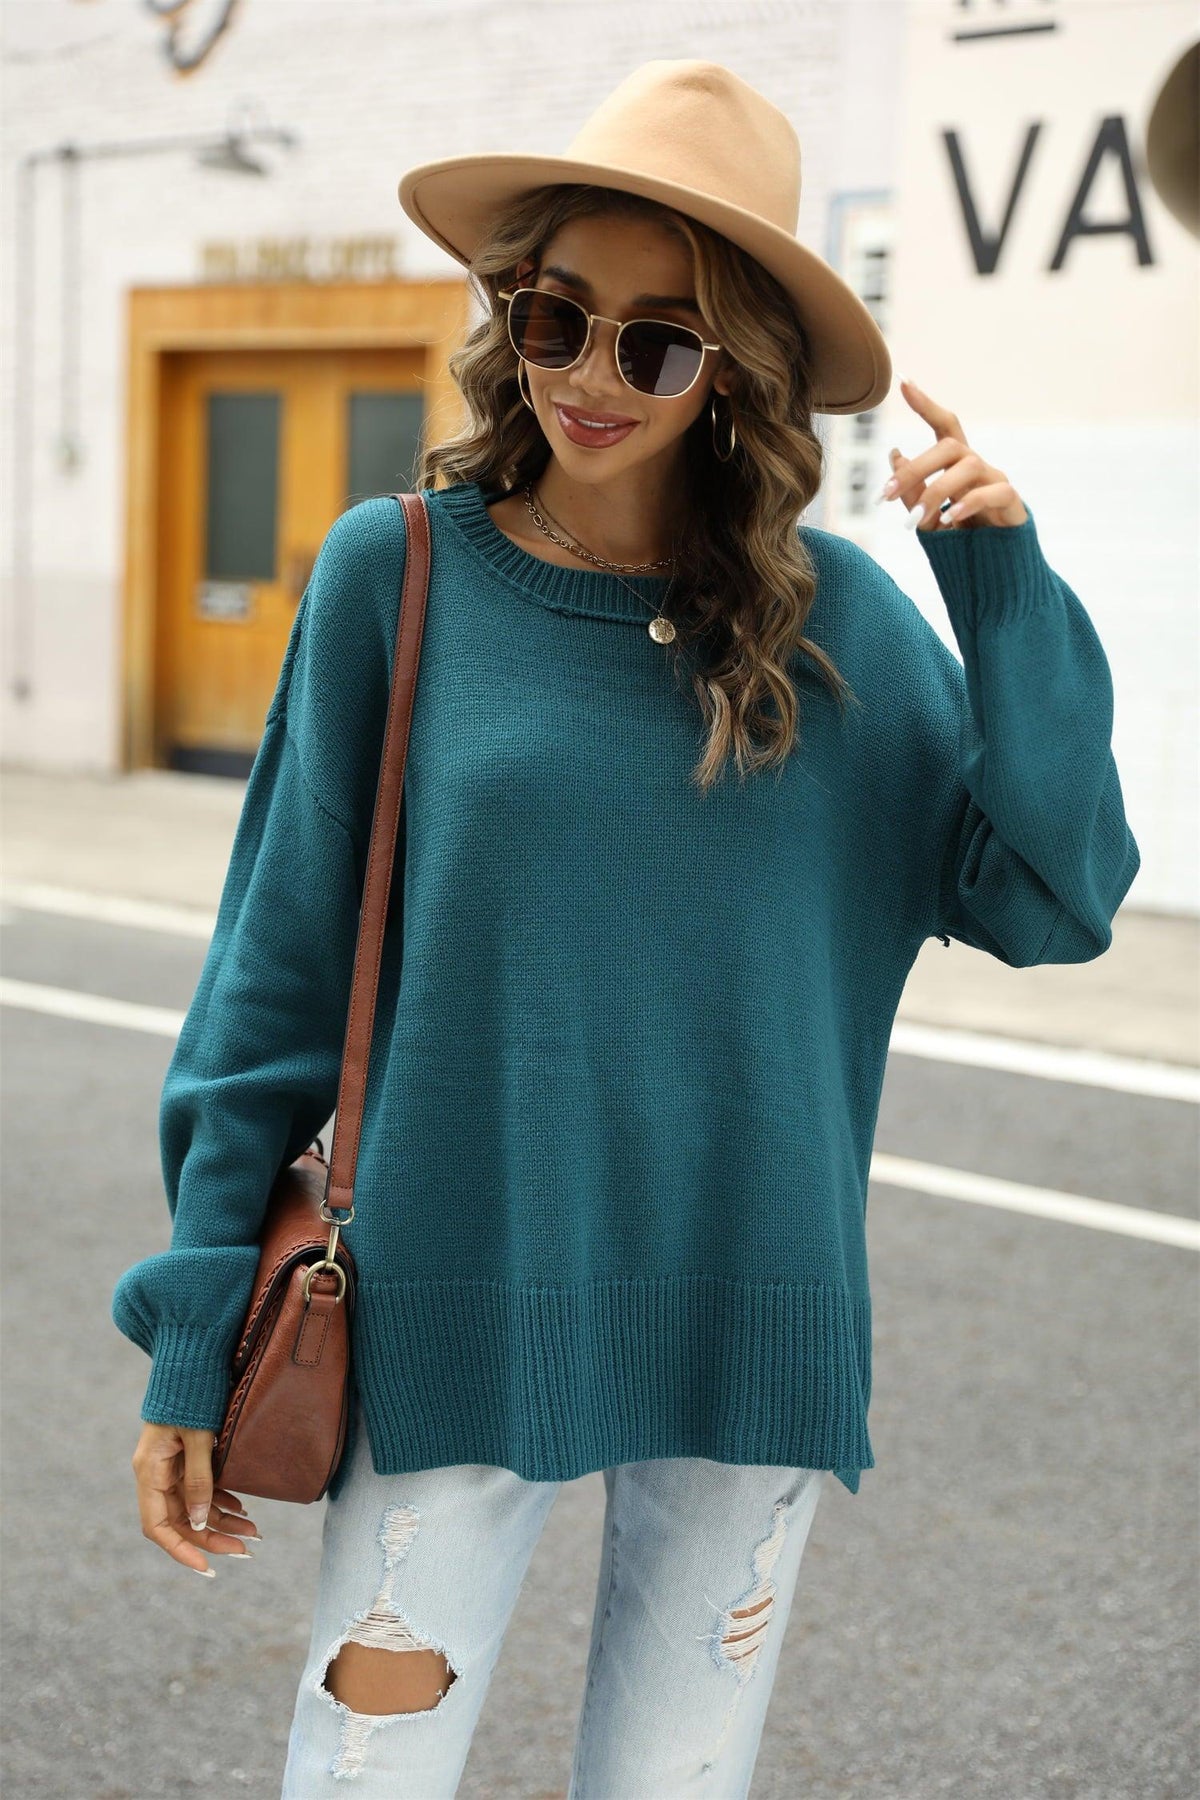 Round Neck Dropped Shoulder Slit Sweater - Crazy Like a Daisy Boutique #